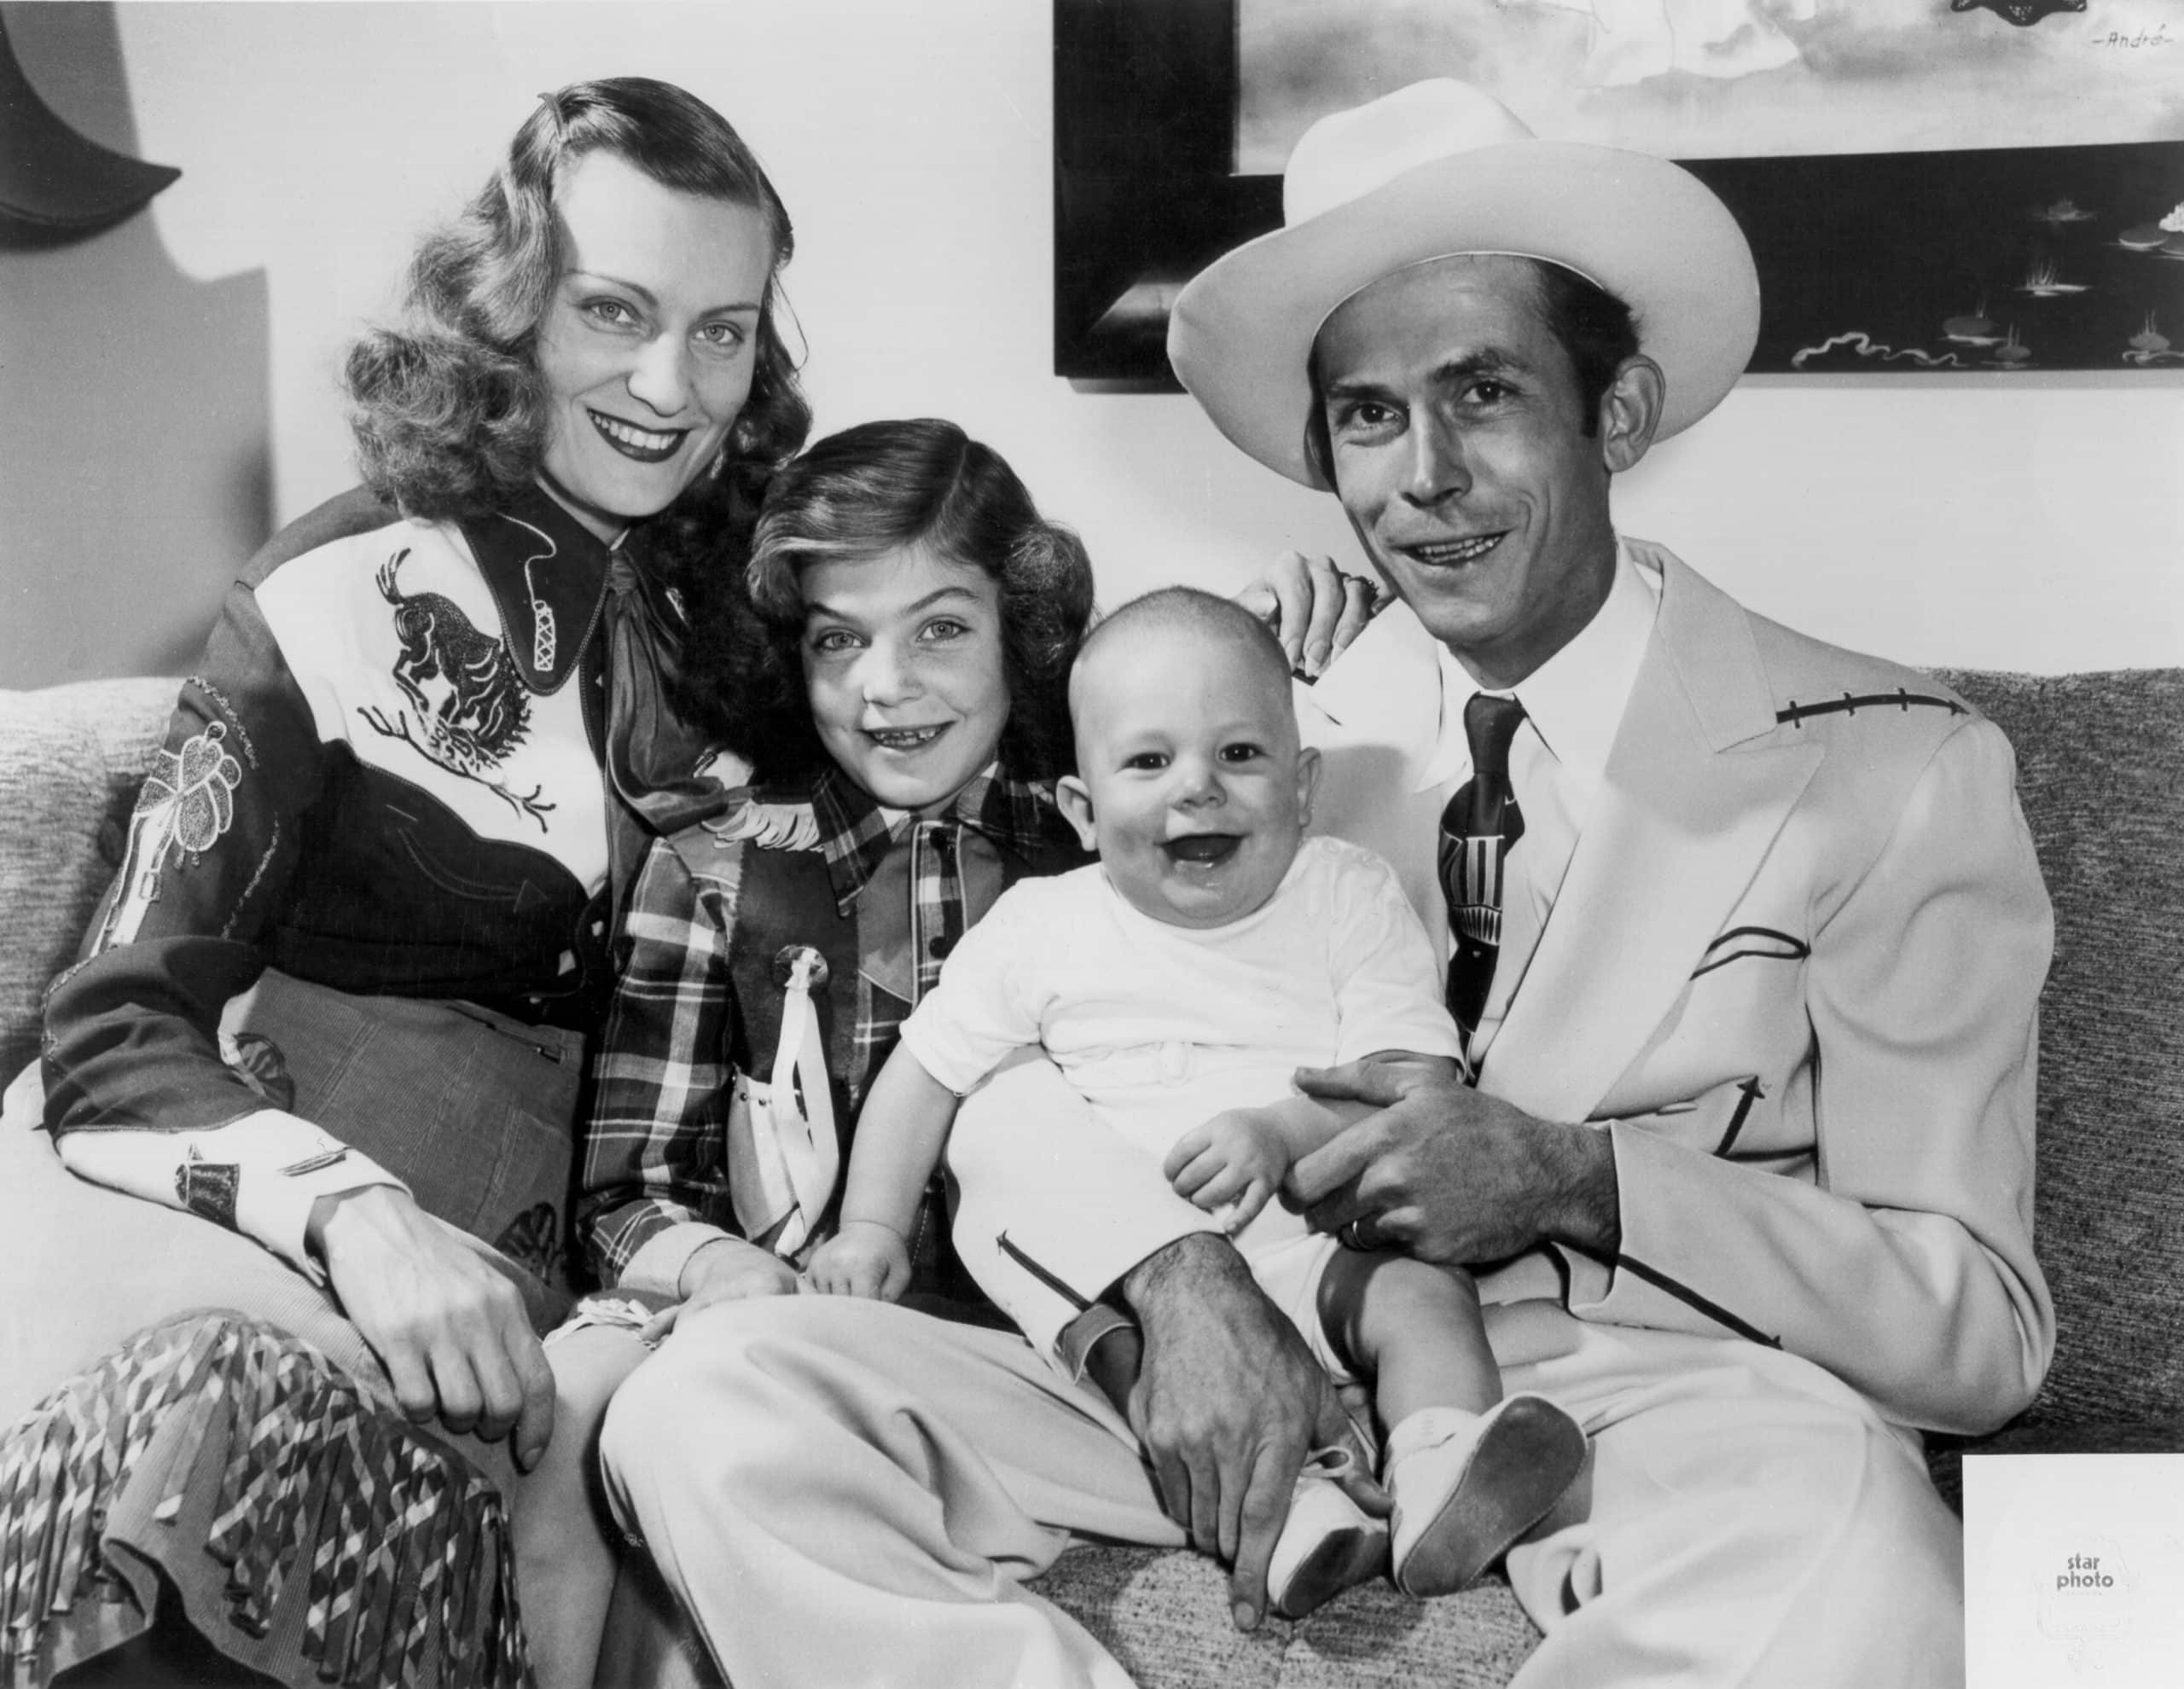 NASHVILLE - 1949: The Williams family Left to Right Audrey Williams, Lycretia Williams, Hank Williams Jr and Hank Williams Sr pose for a portrait in 1949 in Nashville Tennessee.